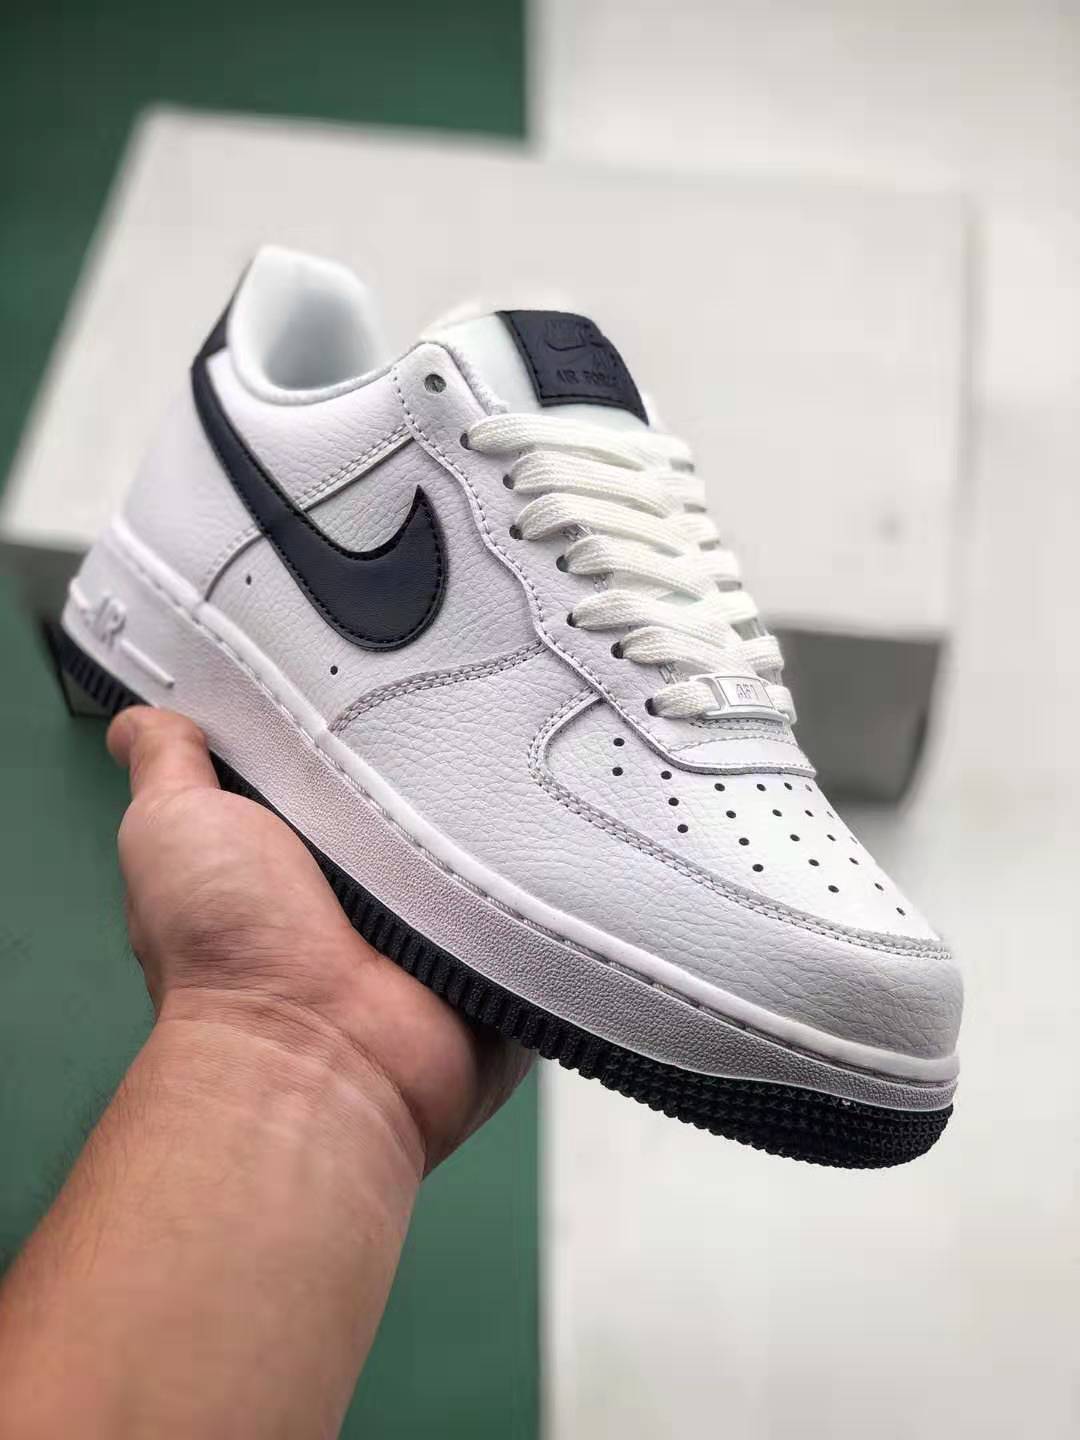 Nike Air Force 1 07 'White Obsidian' AH0287-108 - Classic Iconic Sneakers for Men and Women